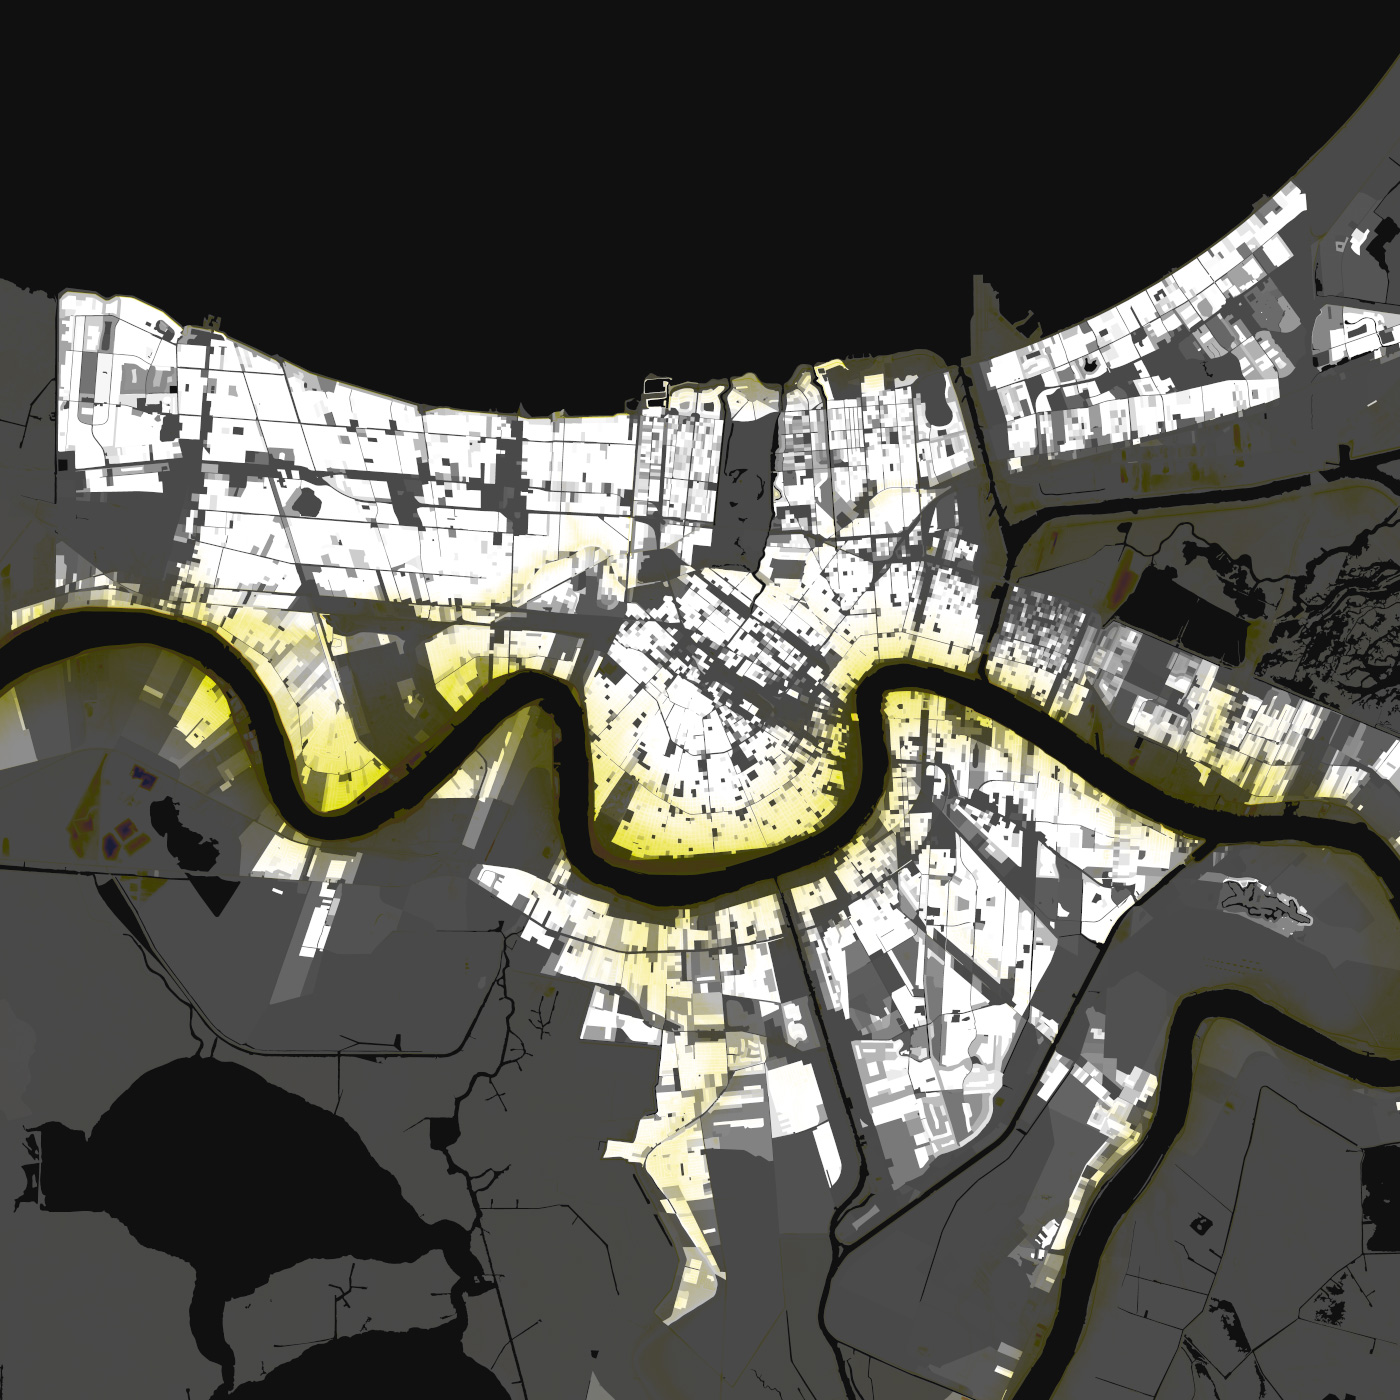 New Orleans, Elevation And Population Density, 2010